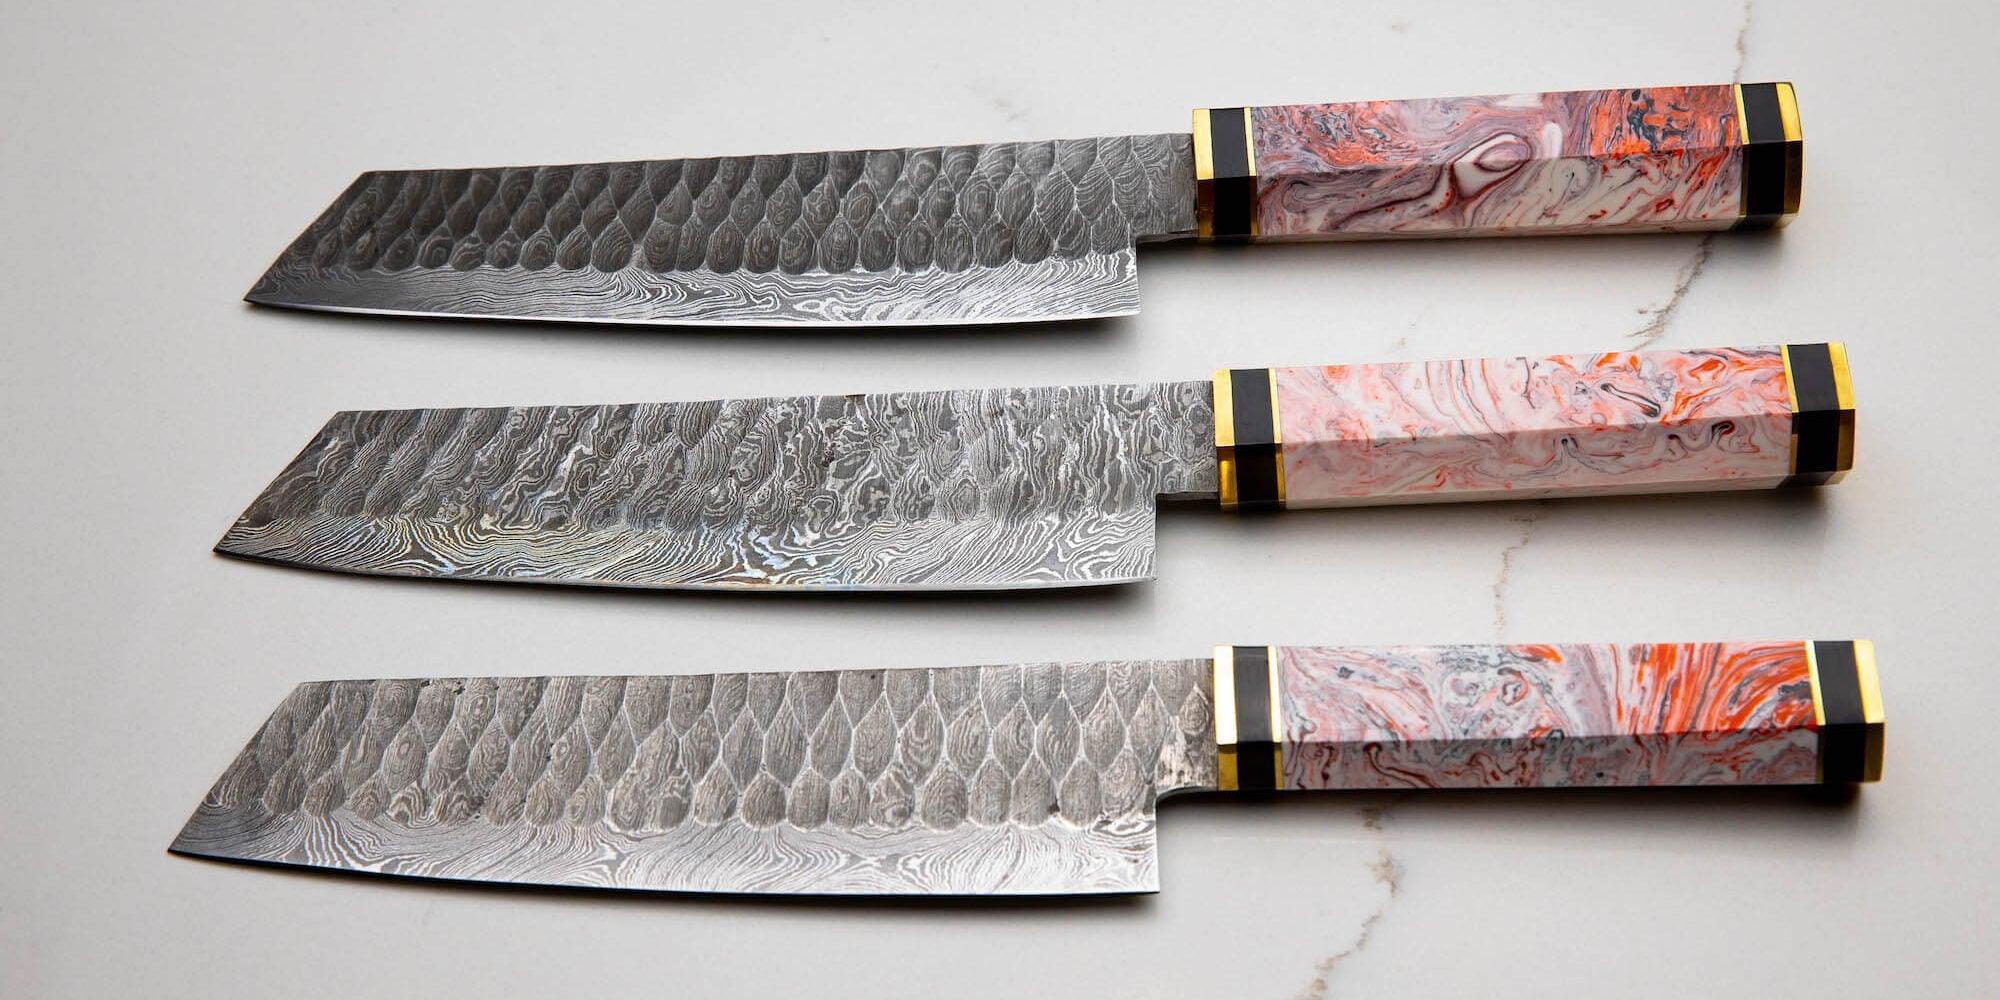 A Good Knife Protector Extends the Life of Your Kitchen Knife